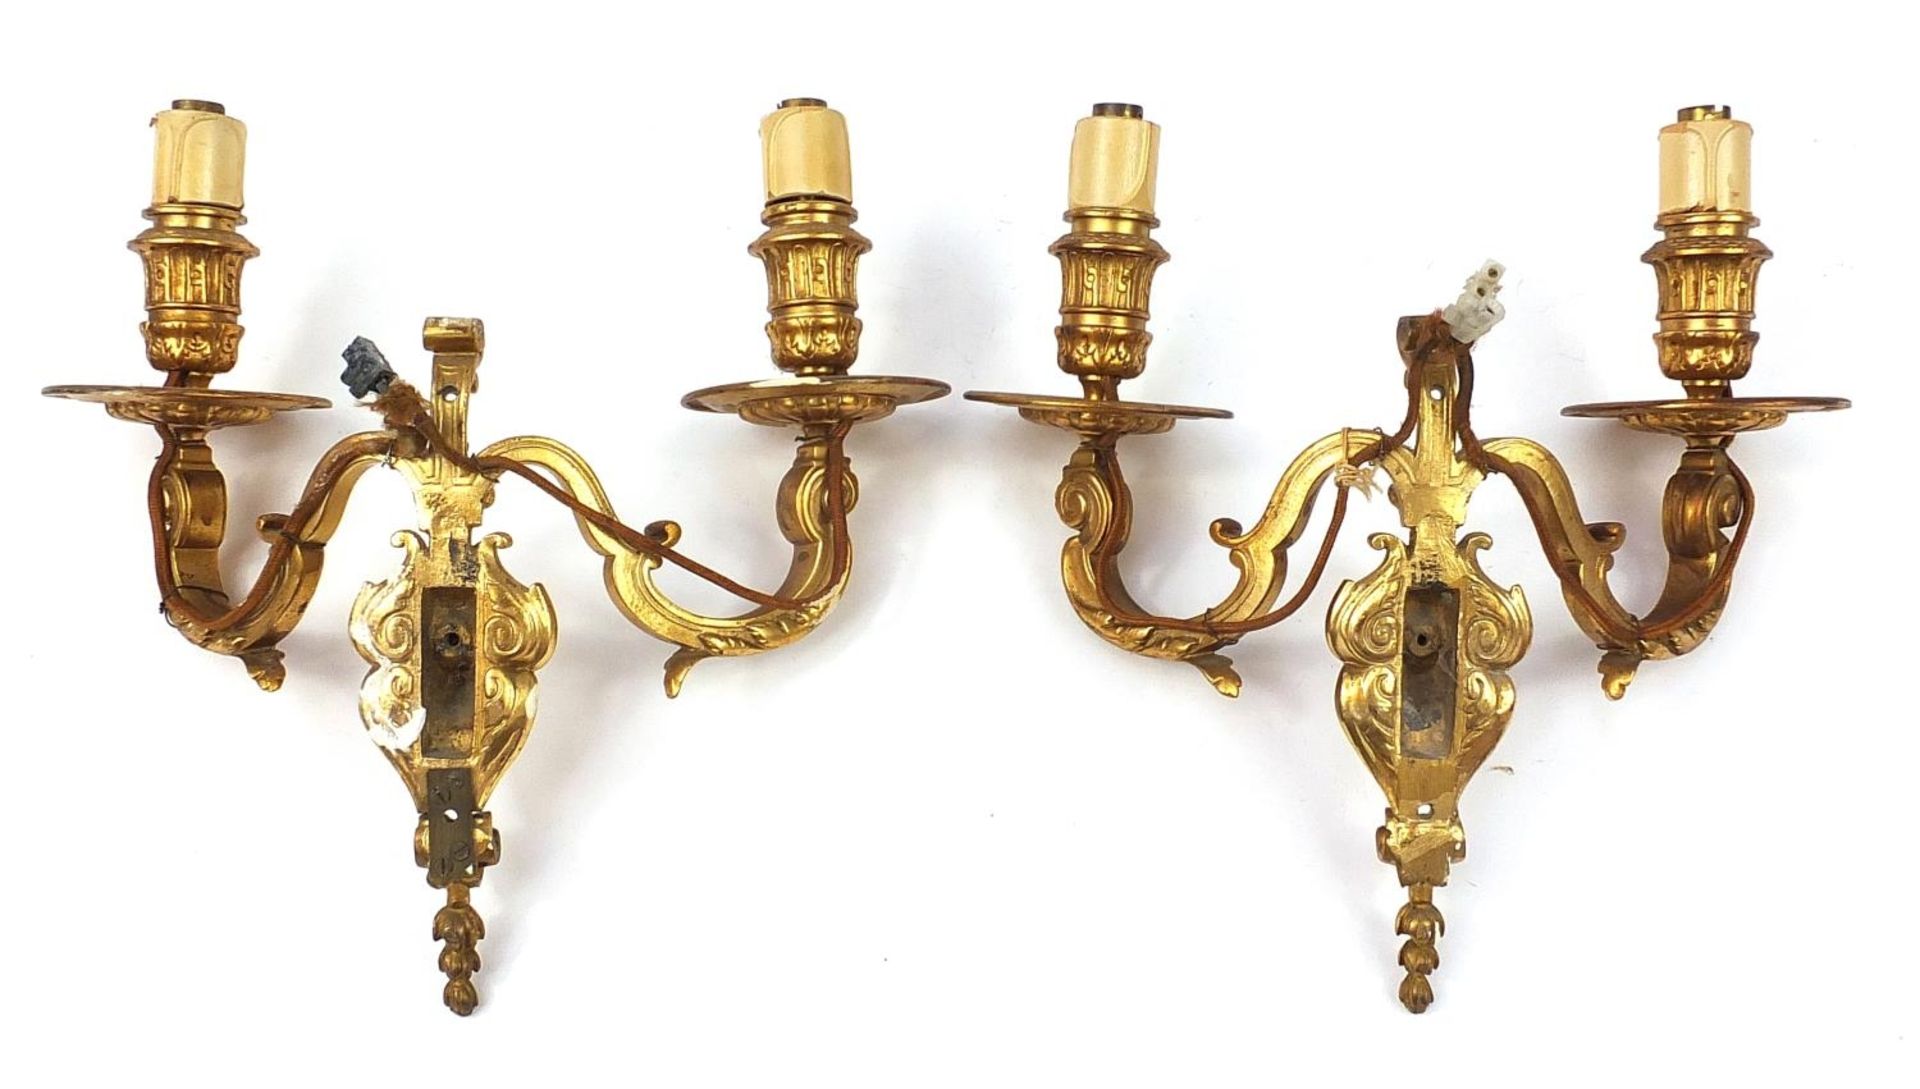 Pair of French style two branch gilt metal wall sconces with masks, 29cm high x 29cm wide - Image 3 of 4